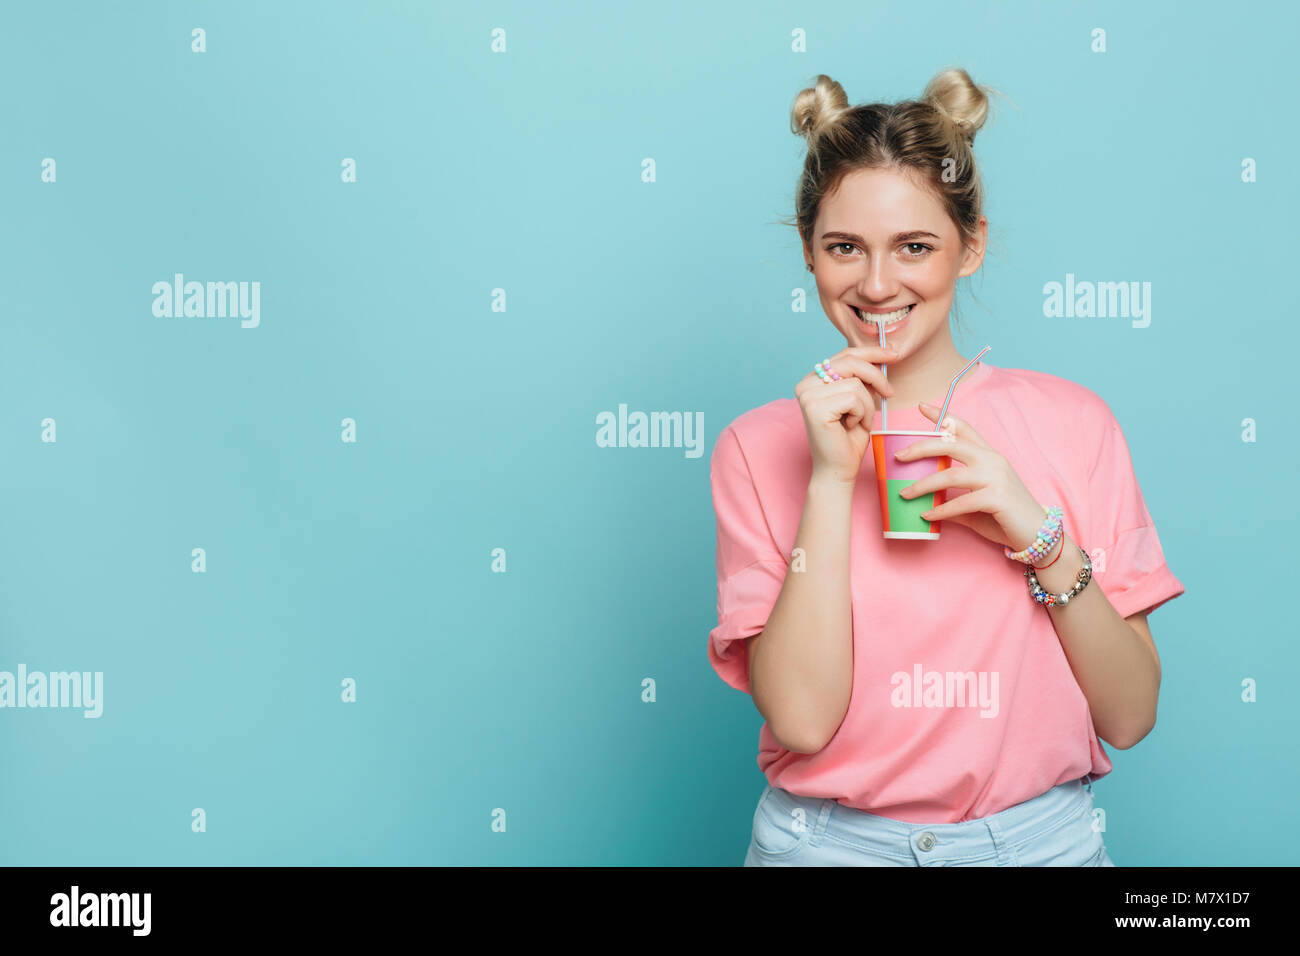 modern young woman holding paper cup and drinking beverage with drinking straw on a blue pastel background. party time Stock Photo